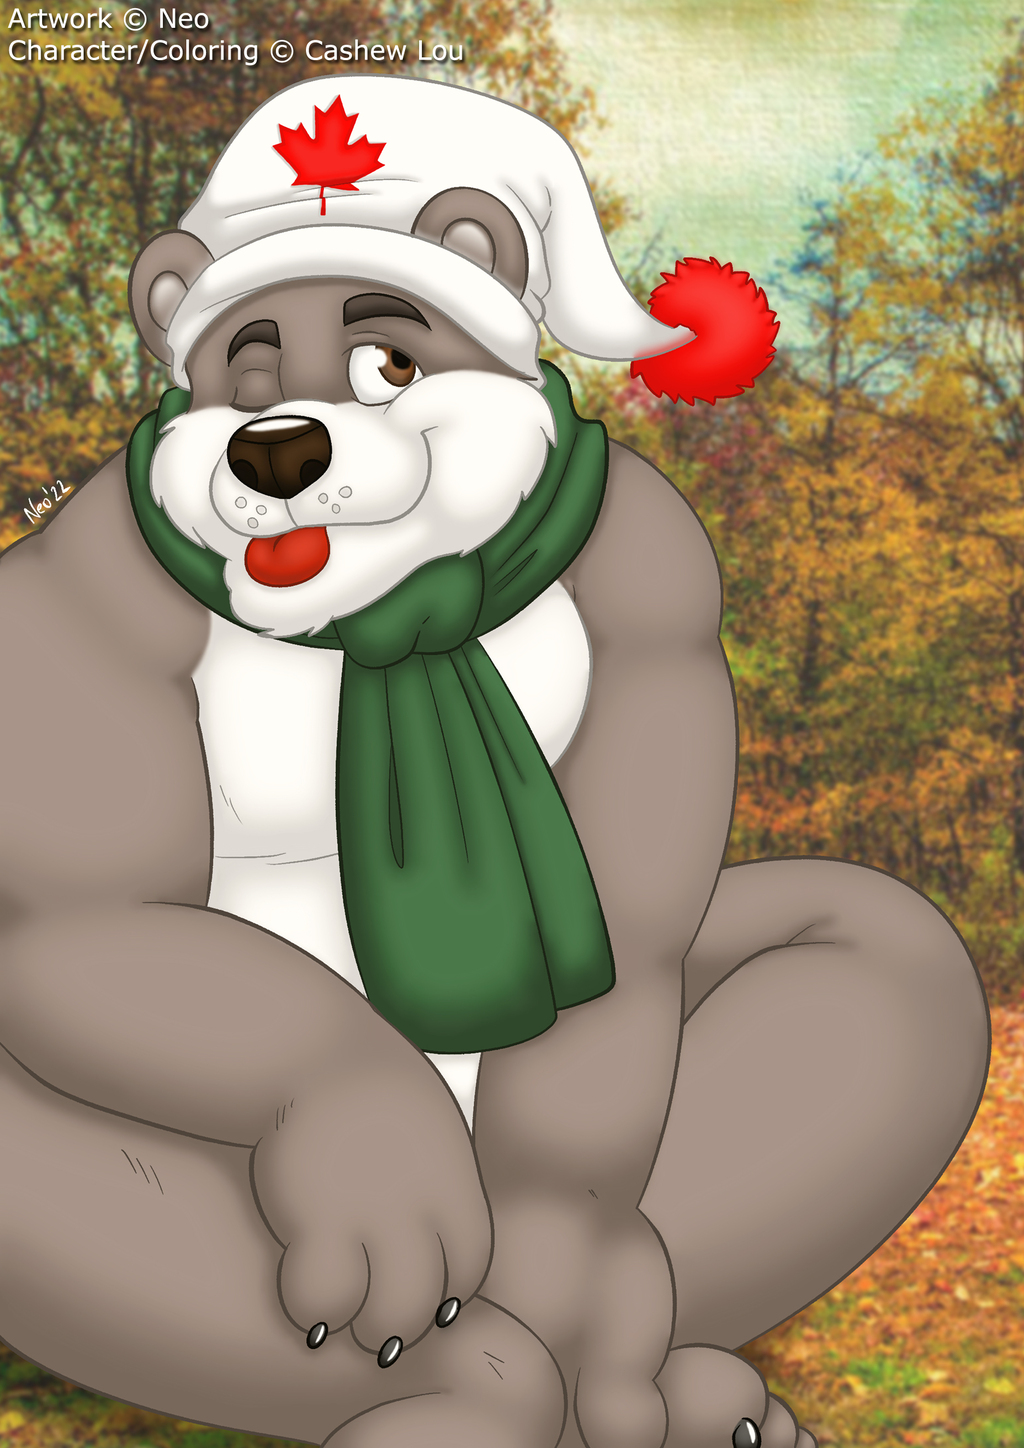 Most recent image: Lou Bear by Neo, colored by me